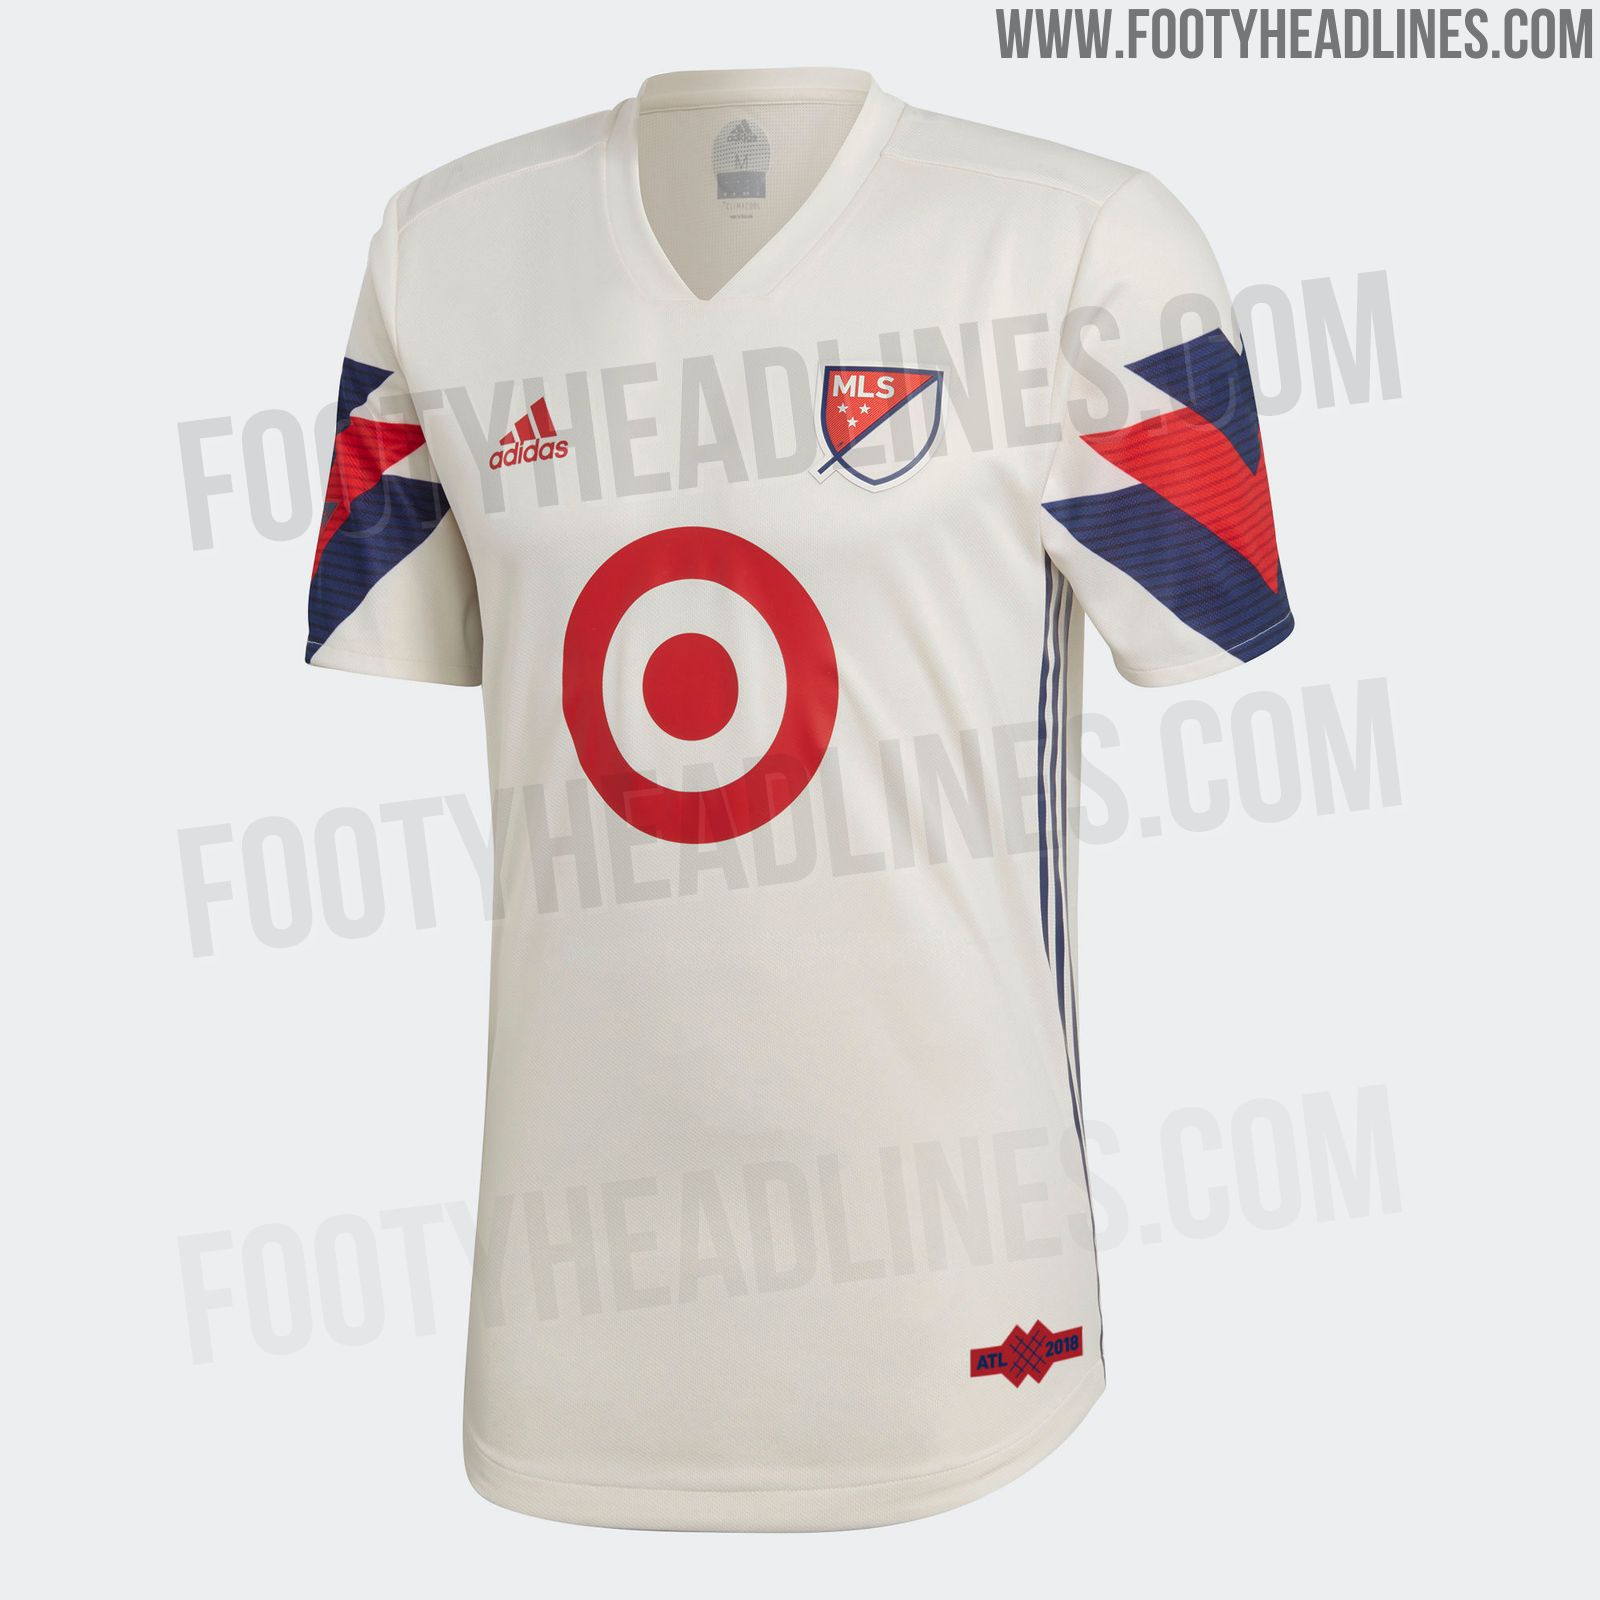 Men's adidas White/Navy 2018 MLS All-Star Game Authentic Jersey